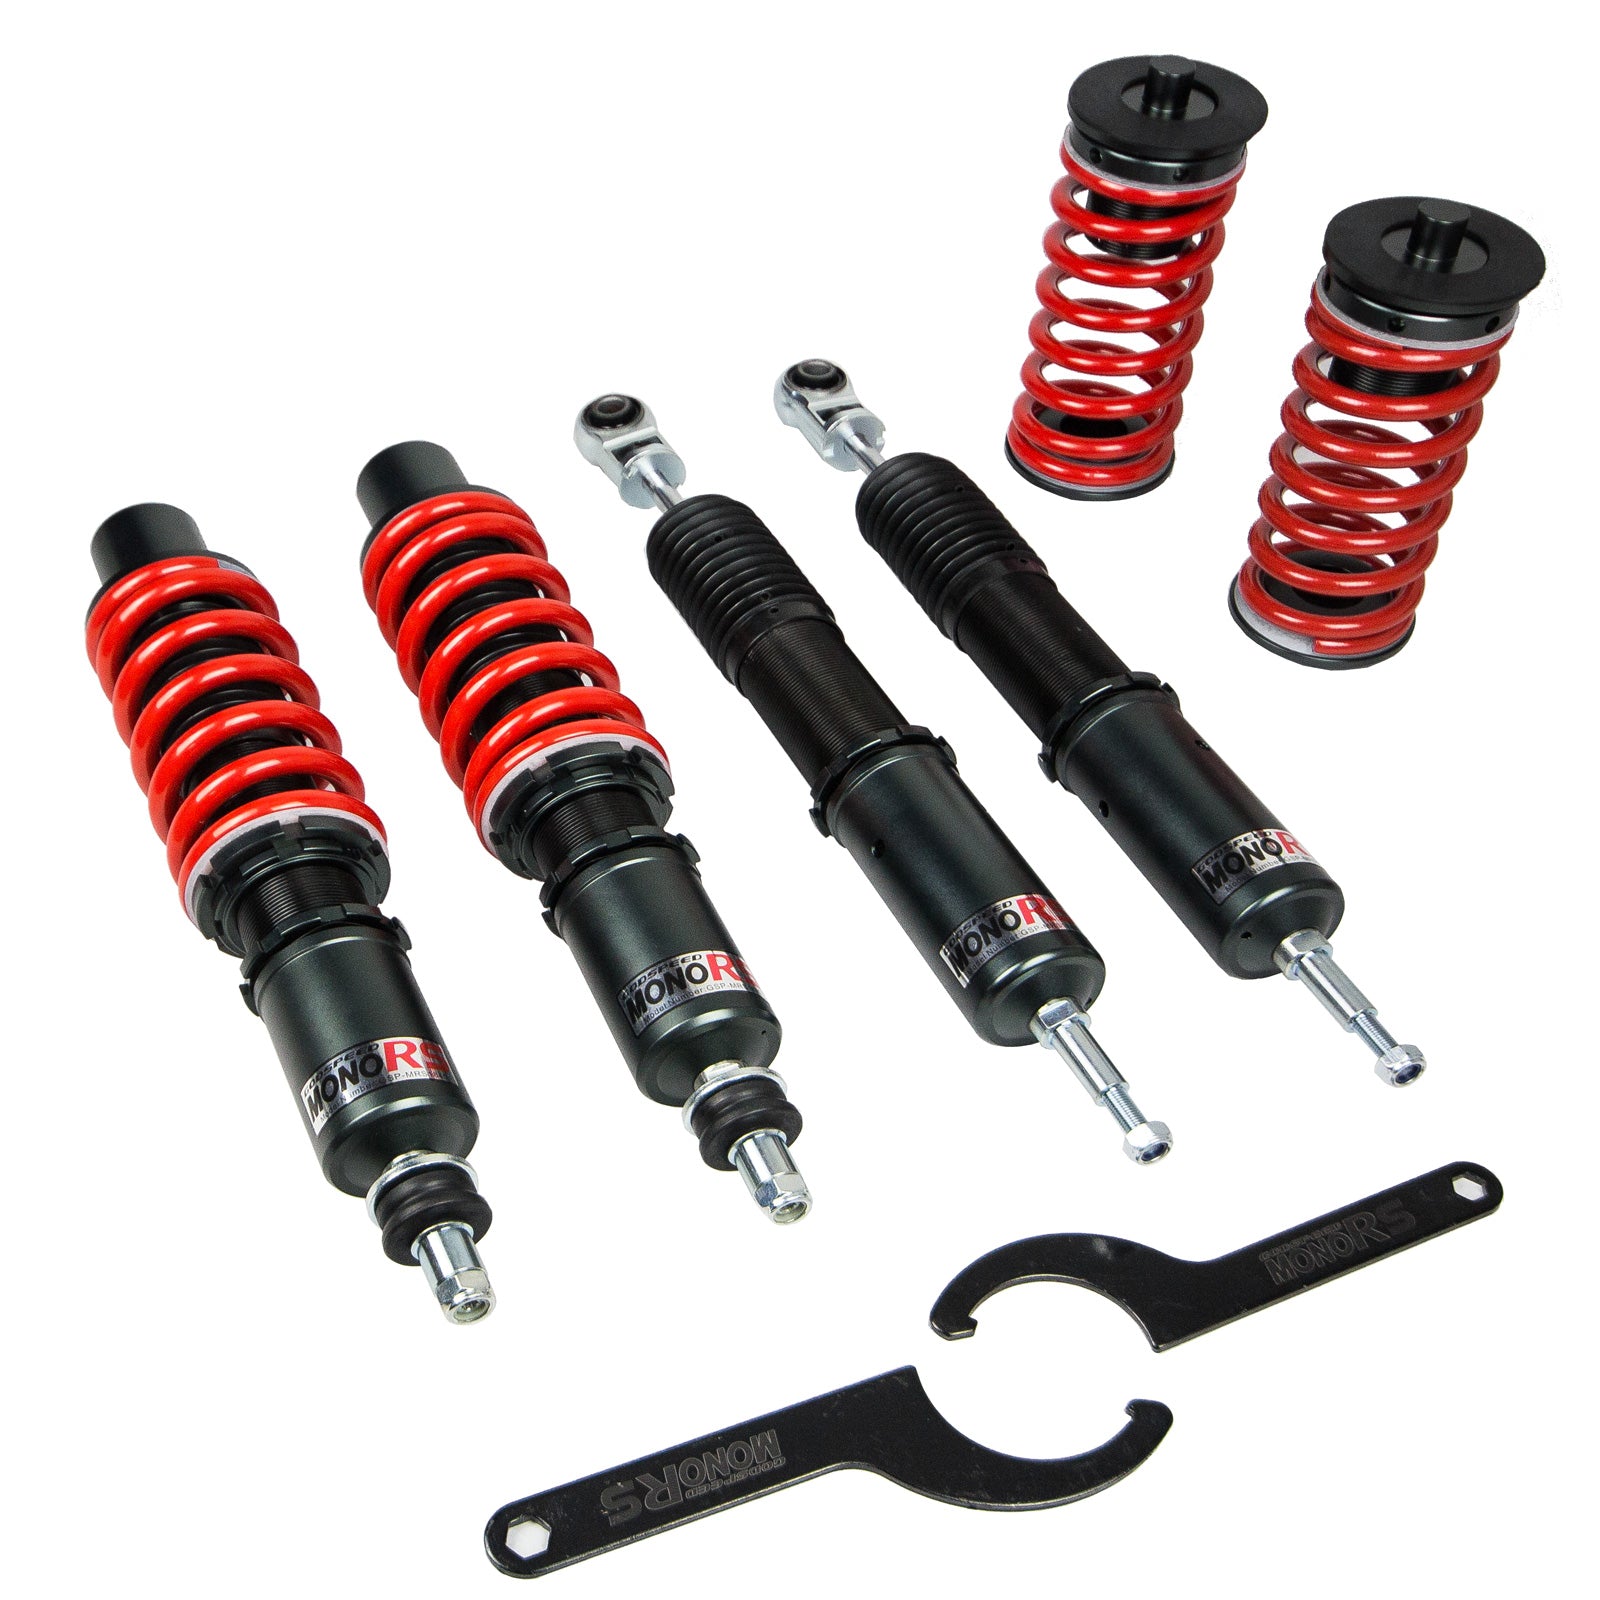 Godspeed MRS1930-B MonoRS Coilover Lowering Kit, 32 Damping Adjustment, Ride Height Adjustable